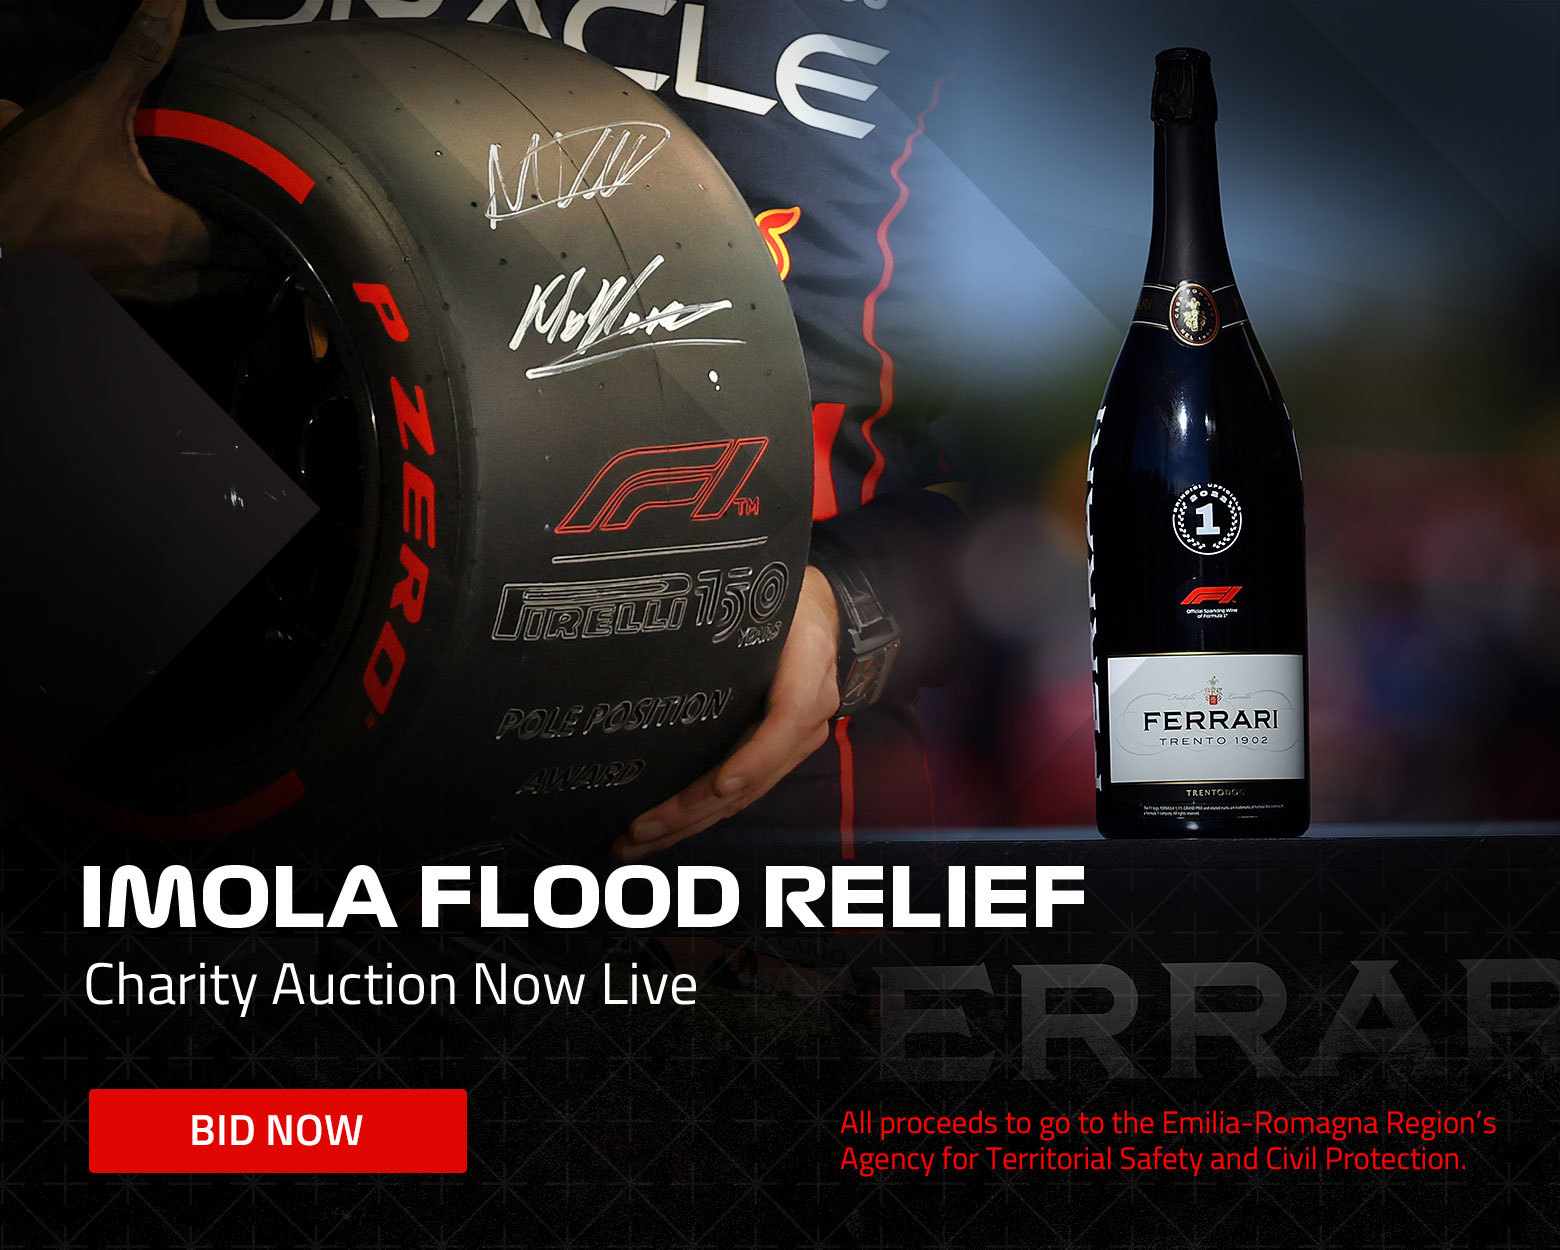 Photo of 27.05.23 IMOLA AWARDS, an autographed bottle of Ferrari Trento sold by F1 originals to raise money for the floods in Emilia-Romagna